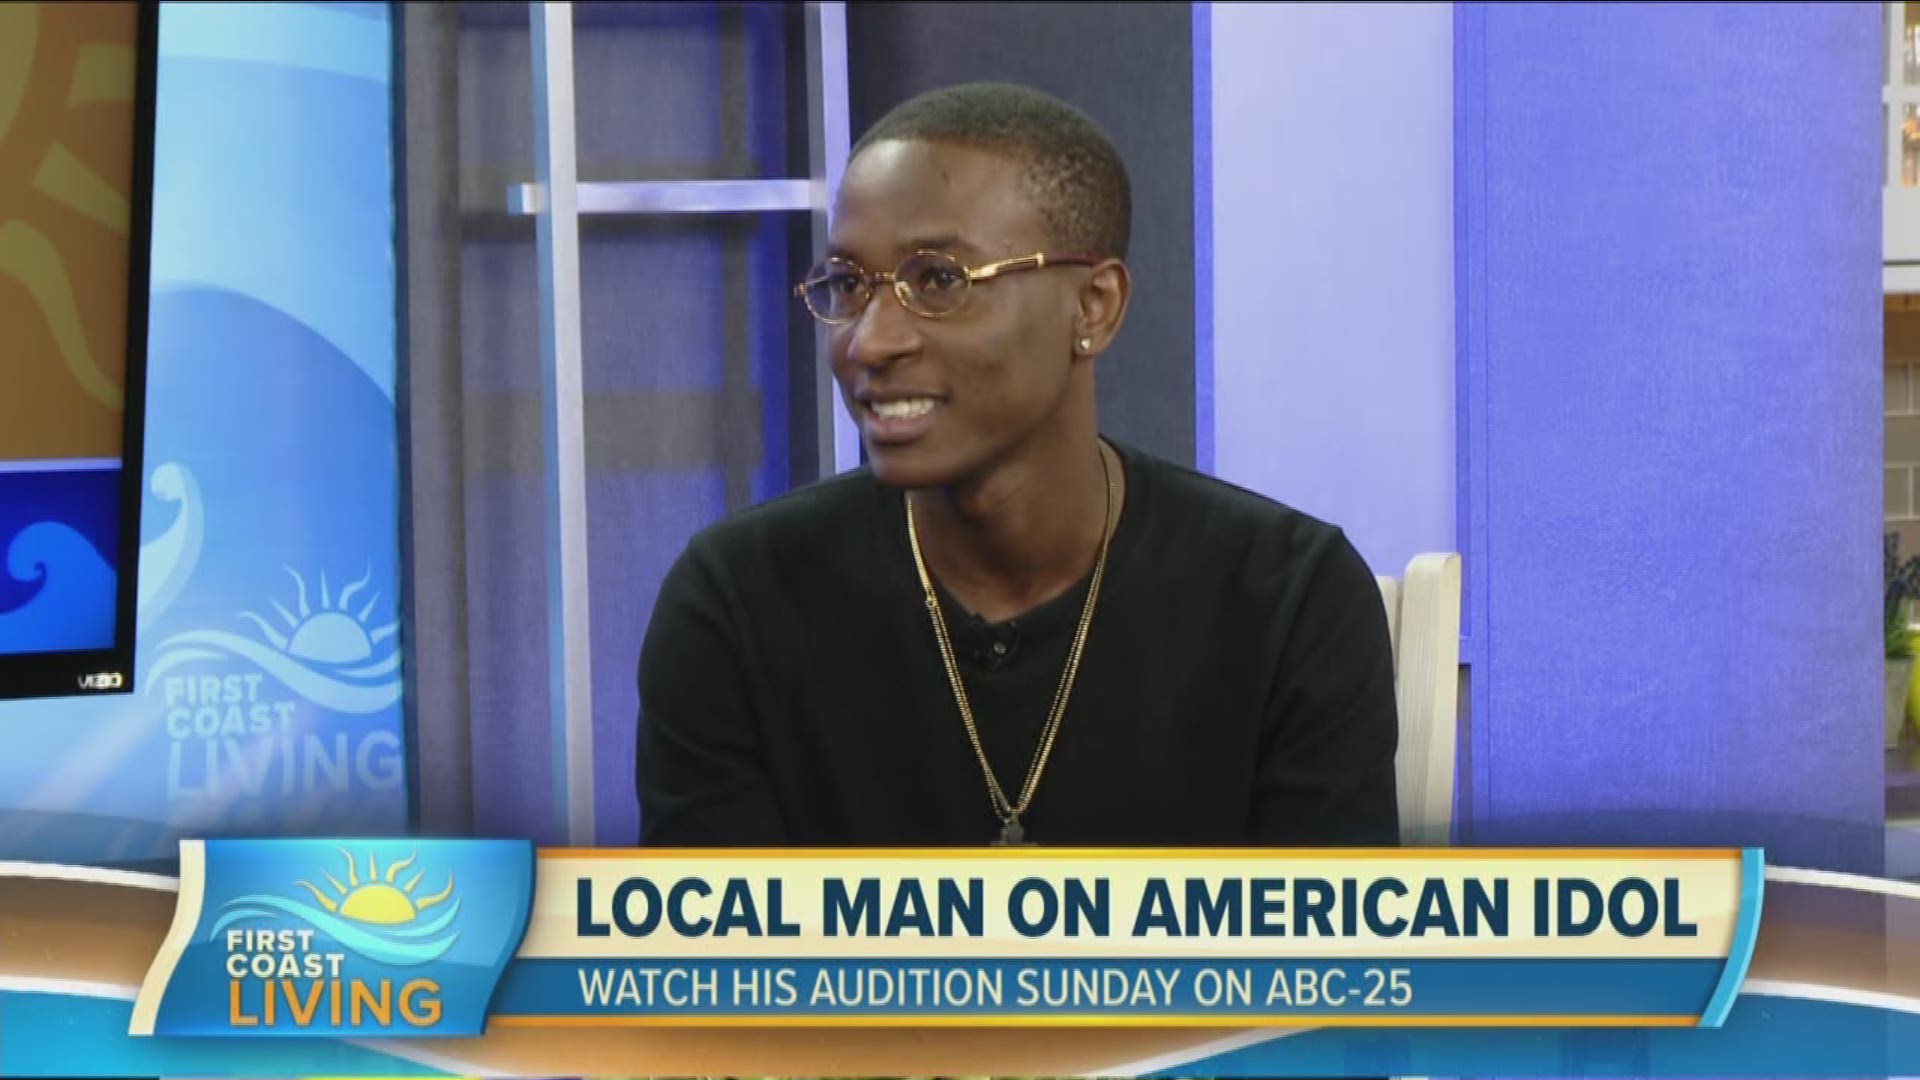 William Oliver Jr. is the local that has made it to the Hollywood rounds!